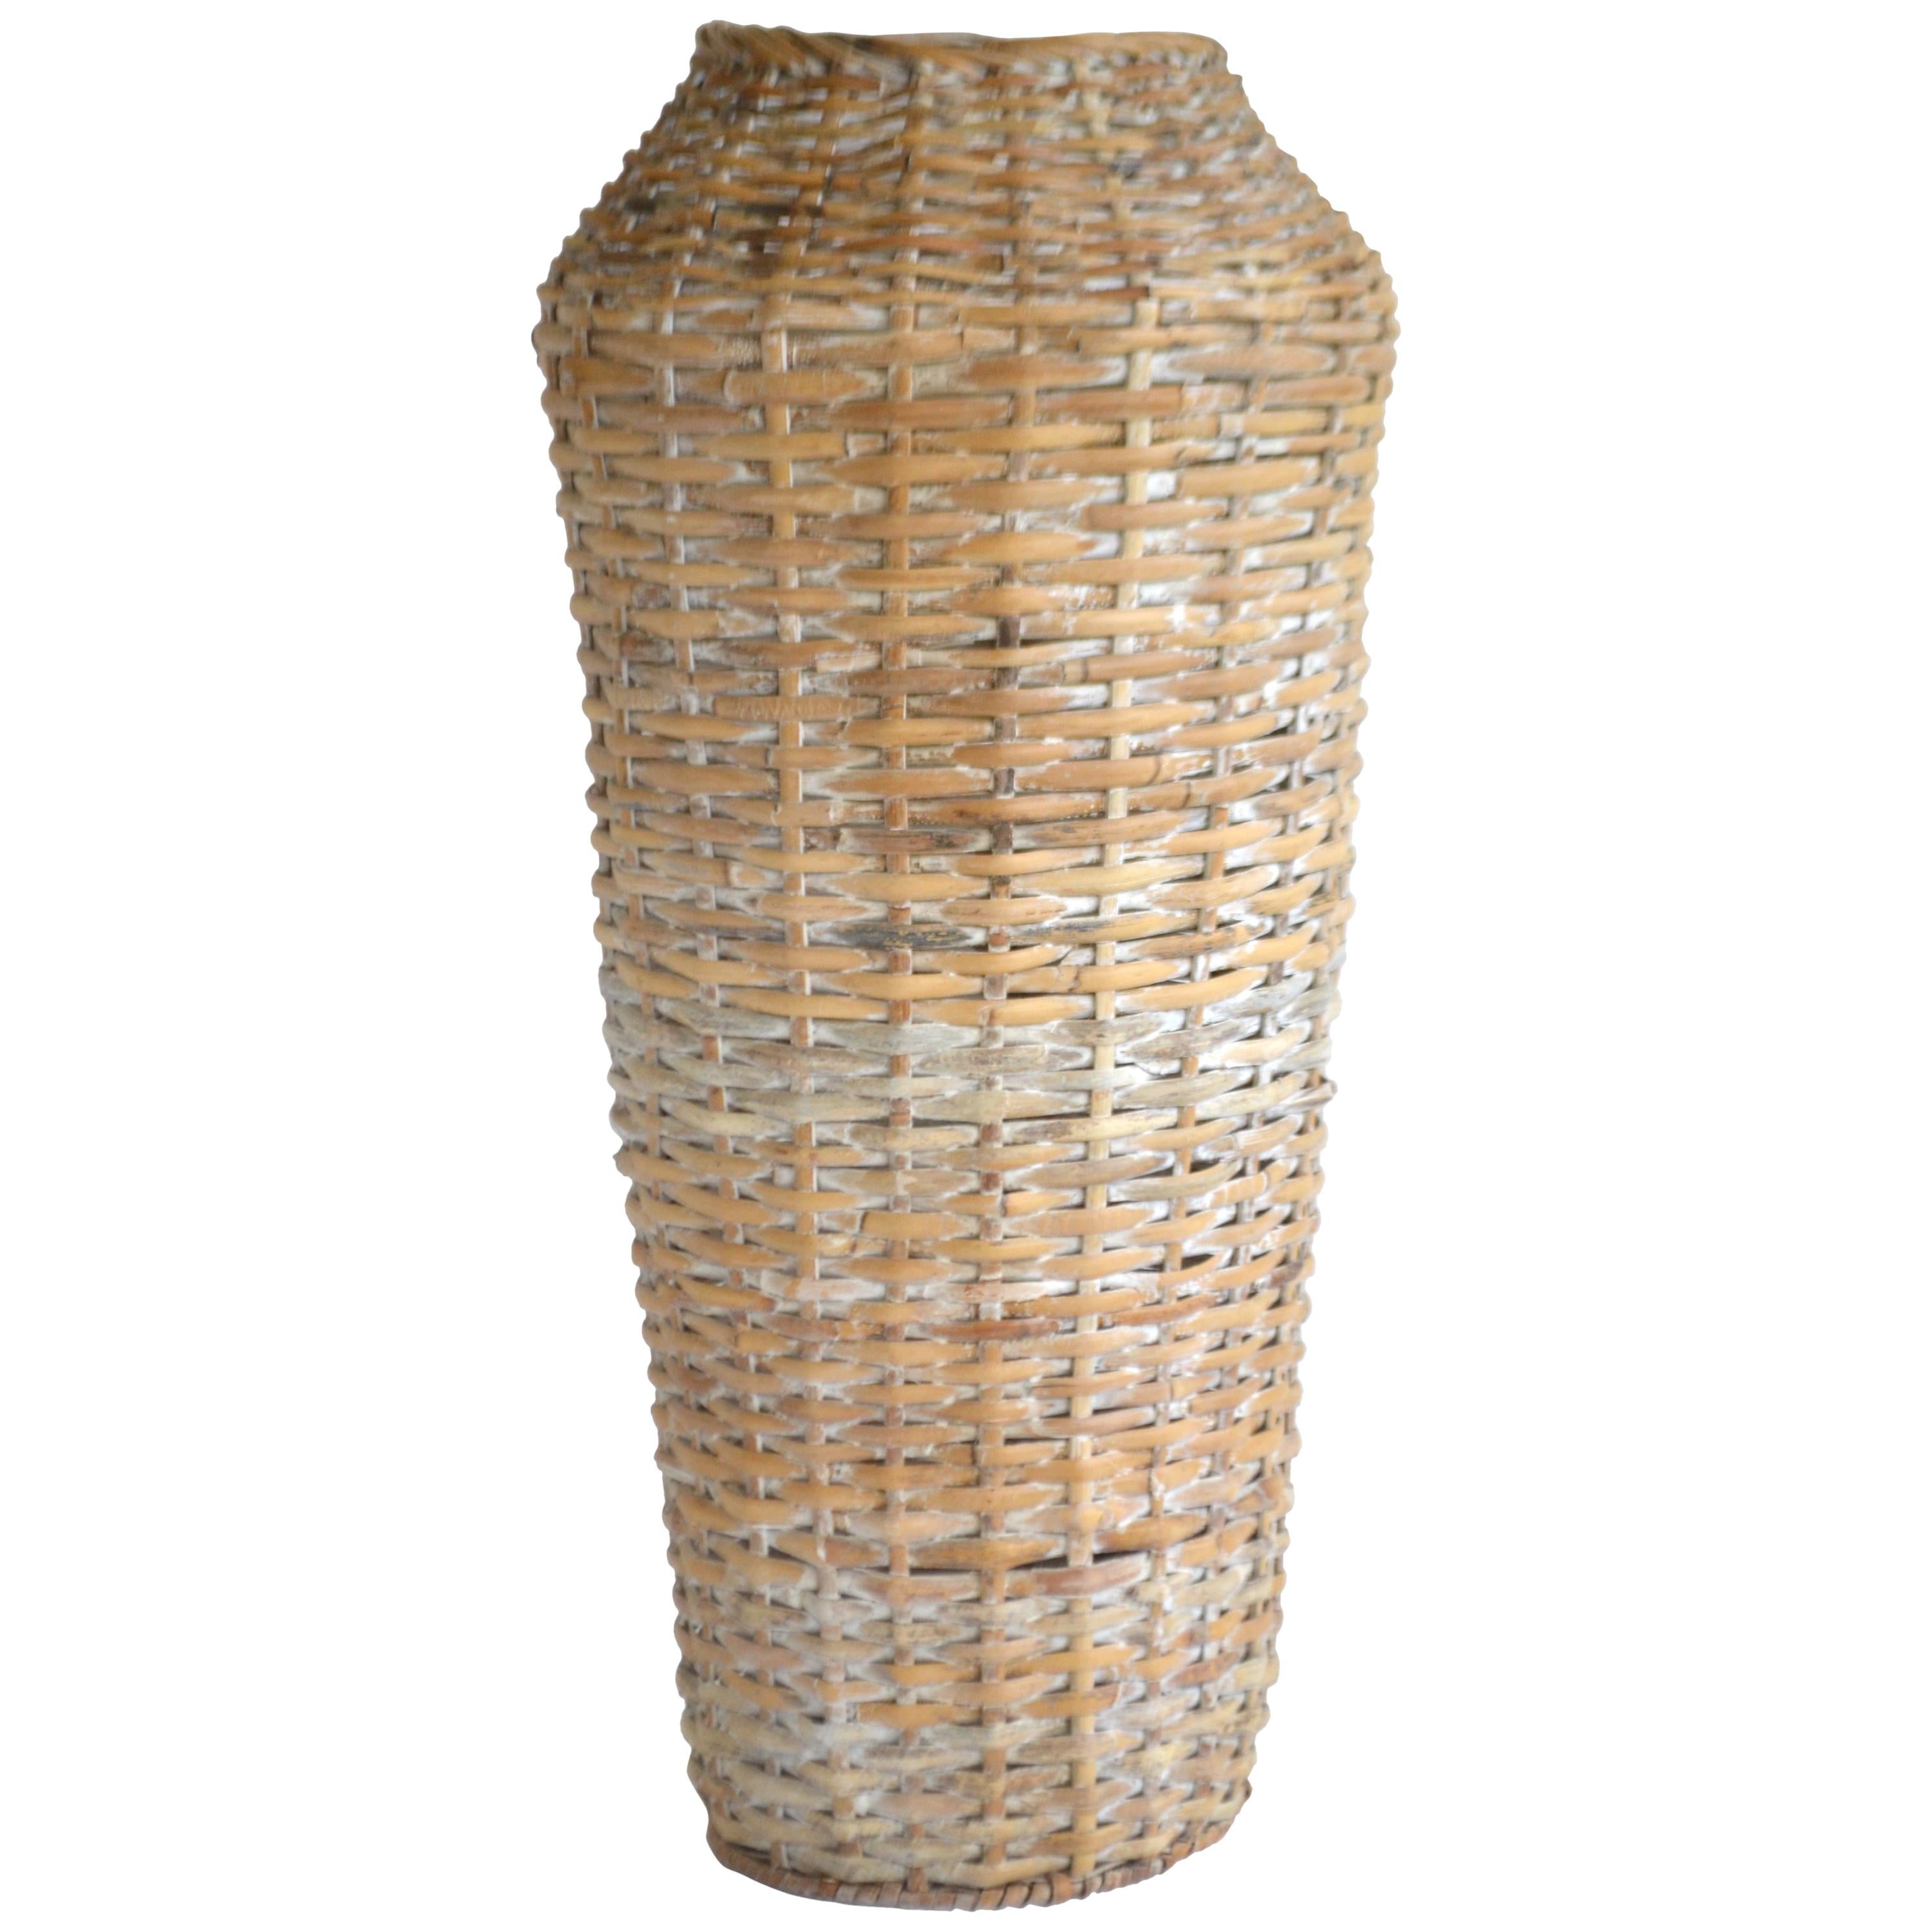 Sculptural Whitewashed Woven Rattan Basket For Sale